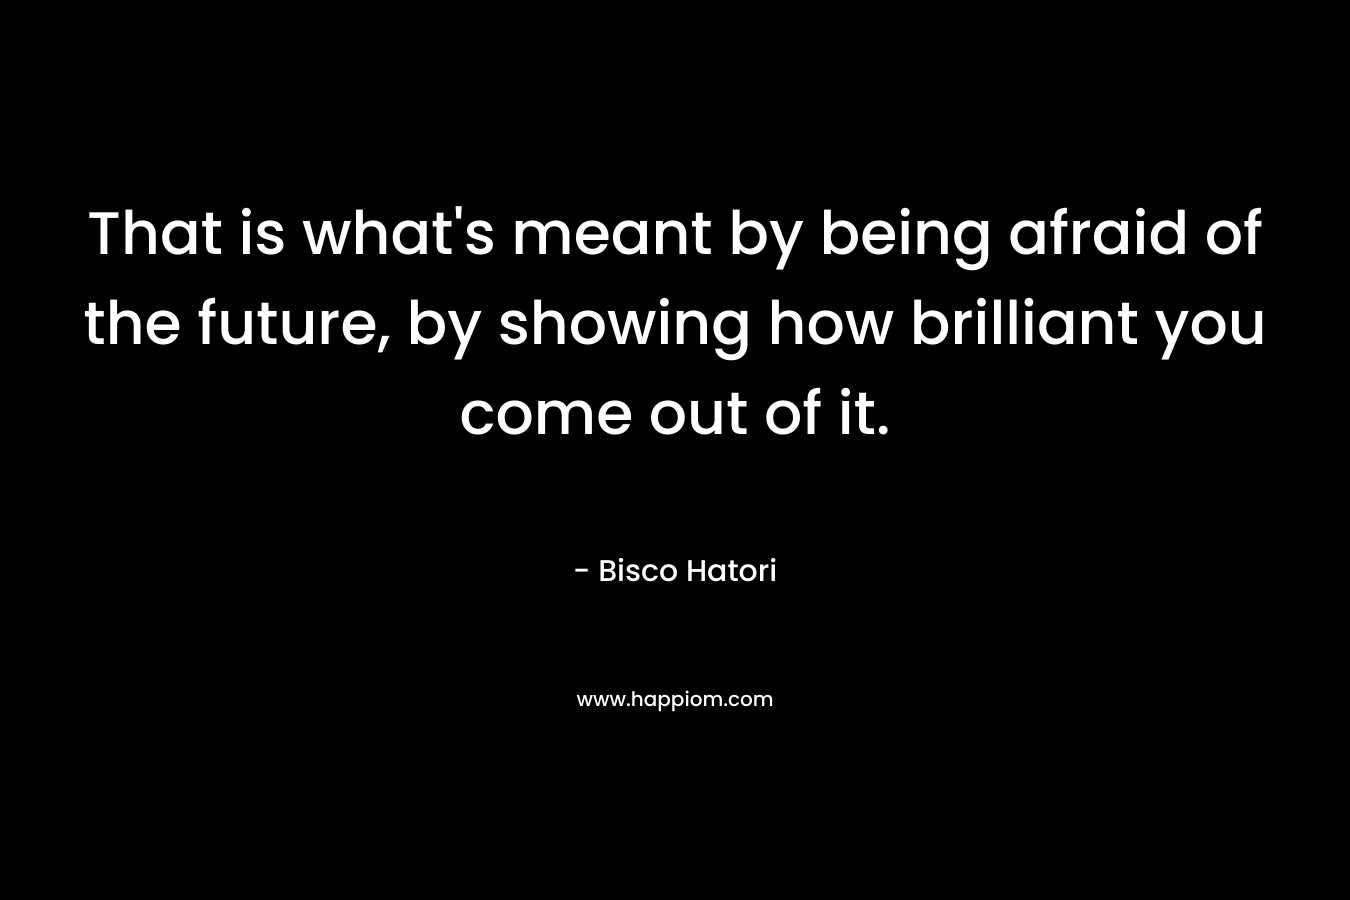 That is what's meant by being afraid of the future, by showing how brilliant you come out of it.